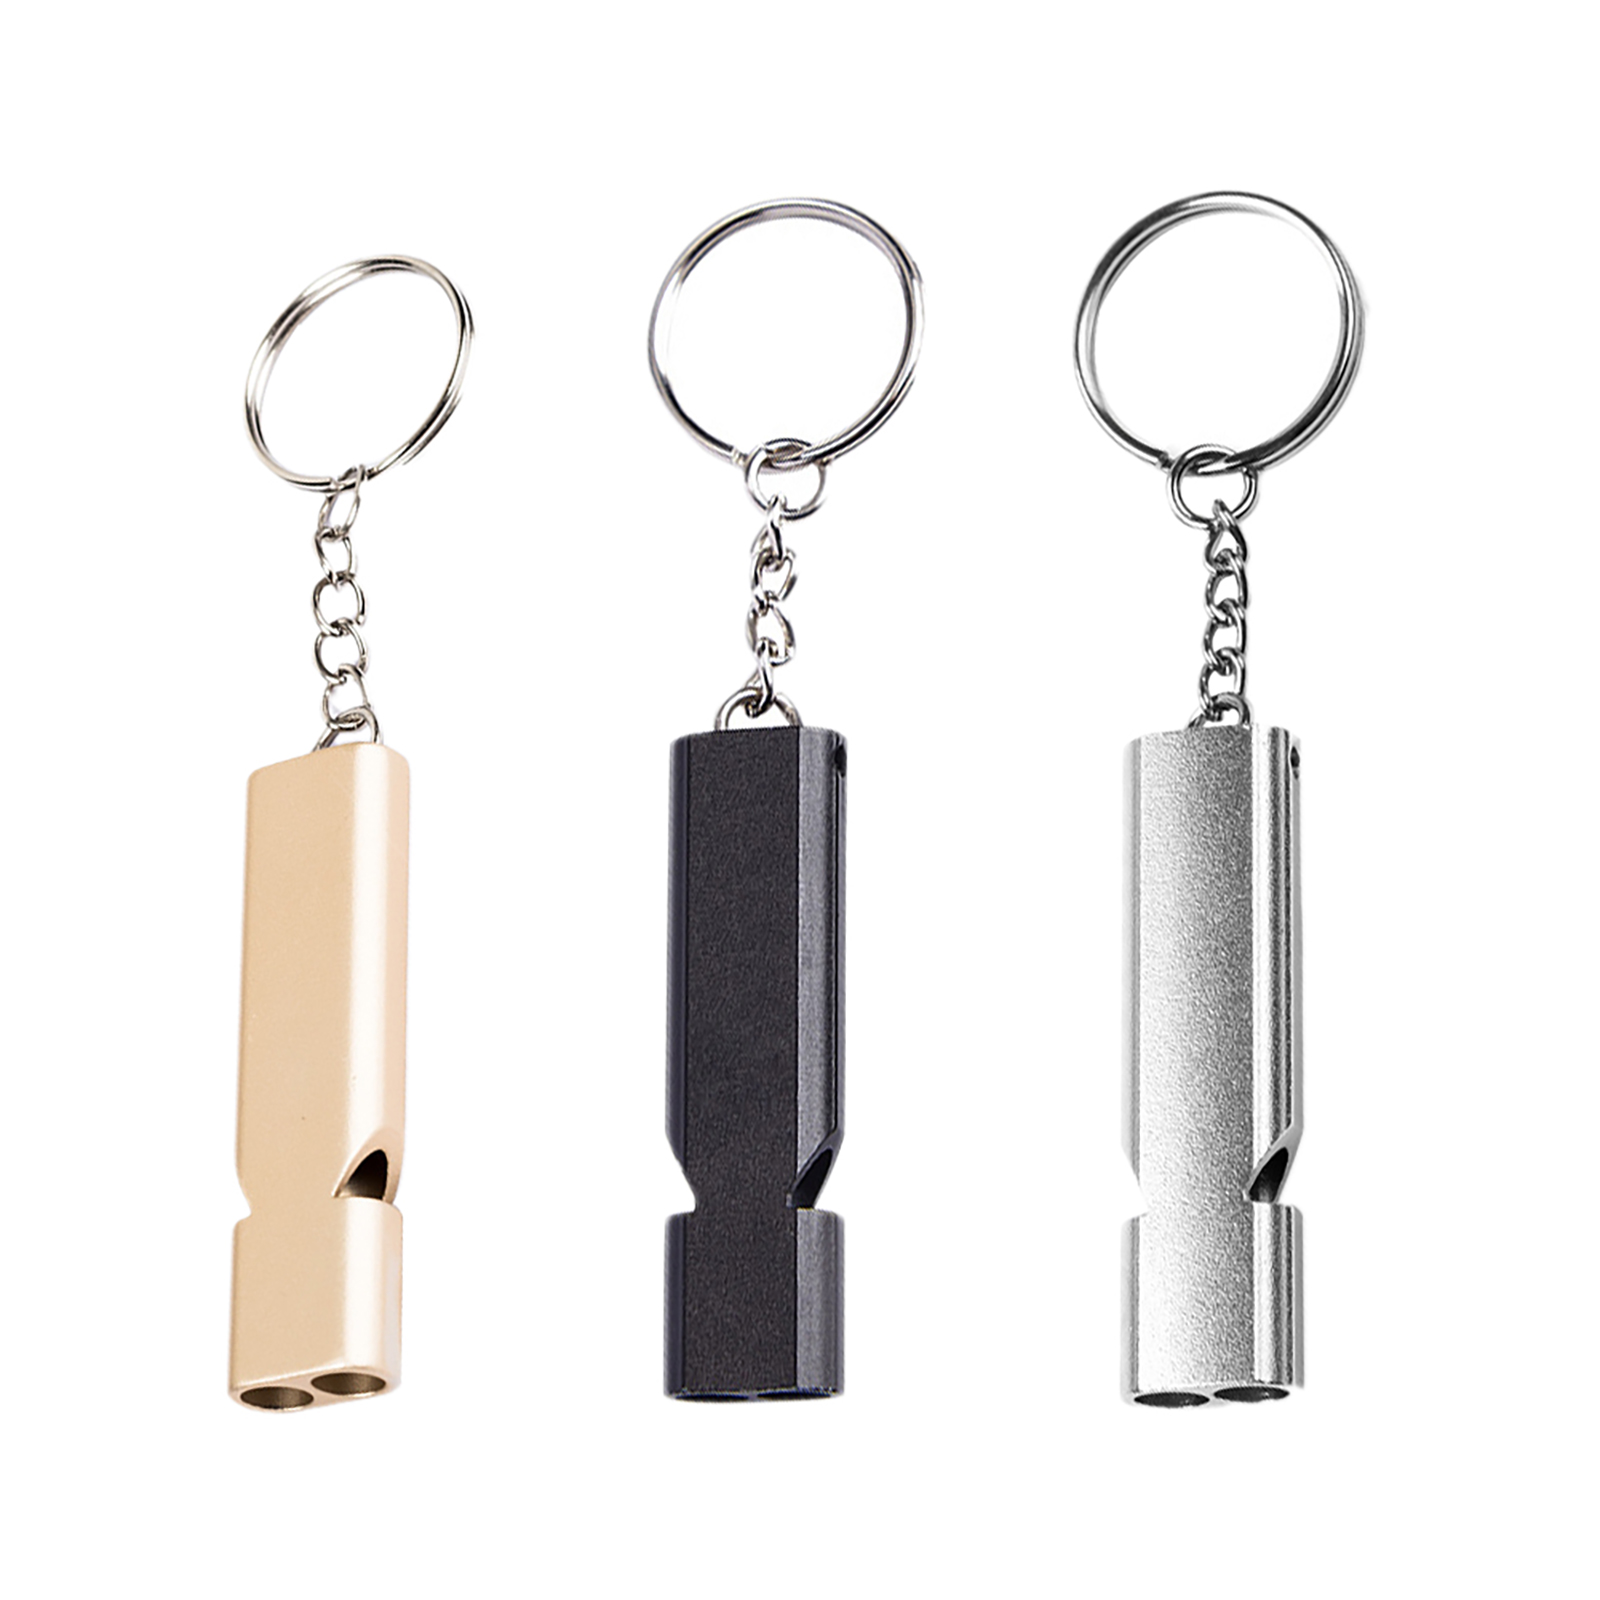 3PCS Outdoor Survival Whistle Aluminum Alloy Double Tube Dual-Frequency High Volume First Aid Whistle Outdoors Tool